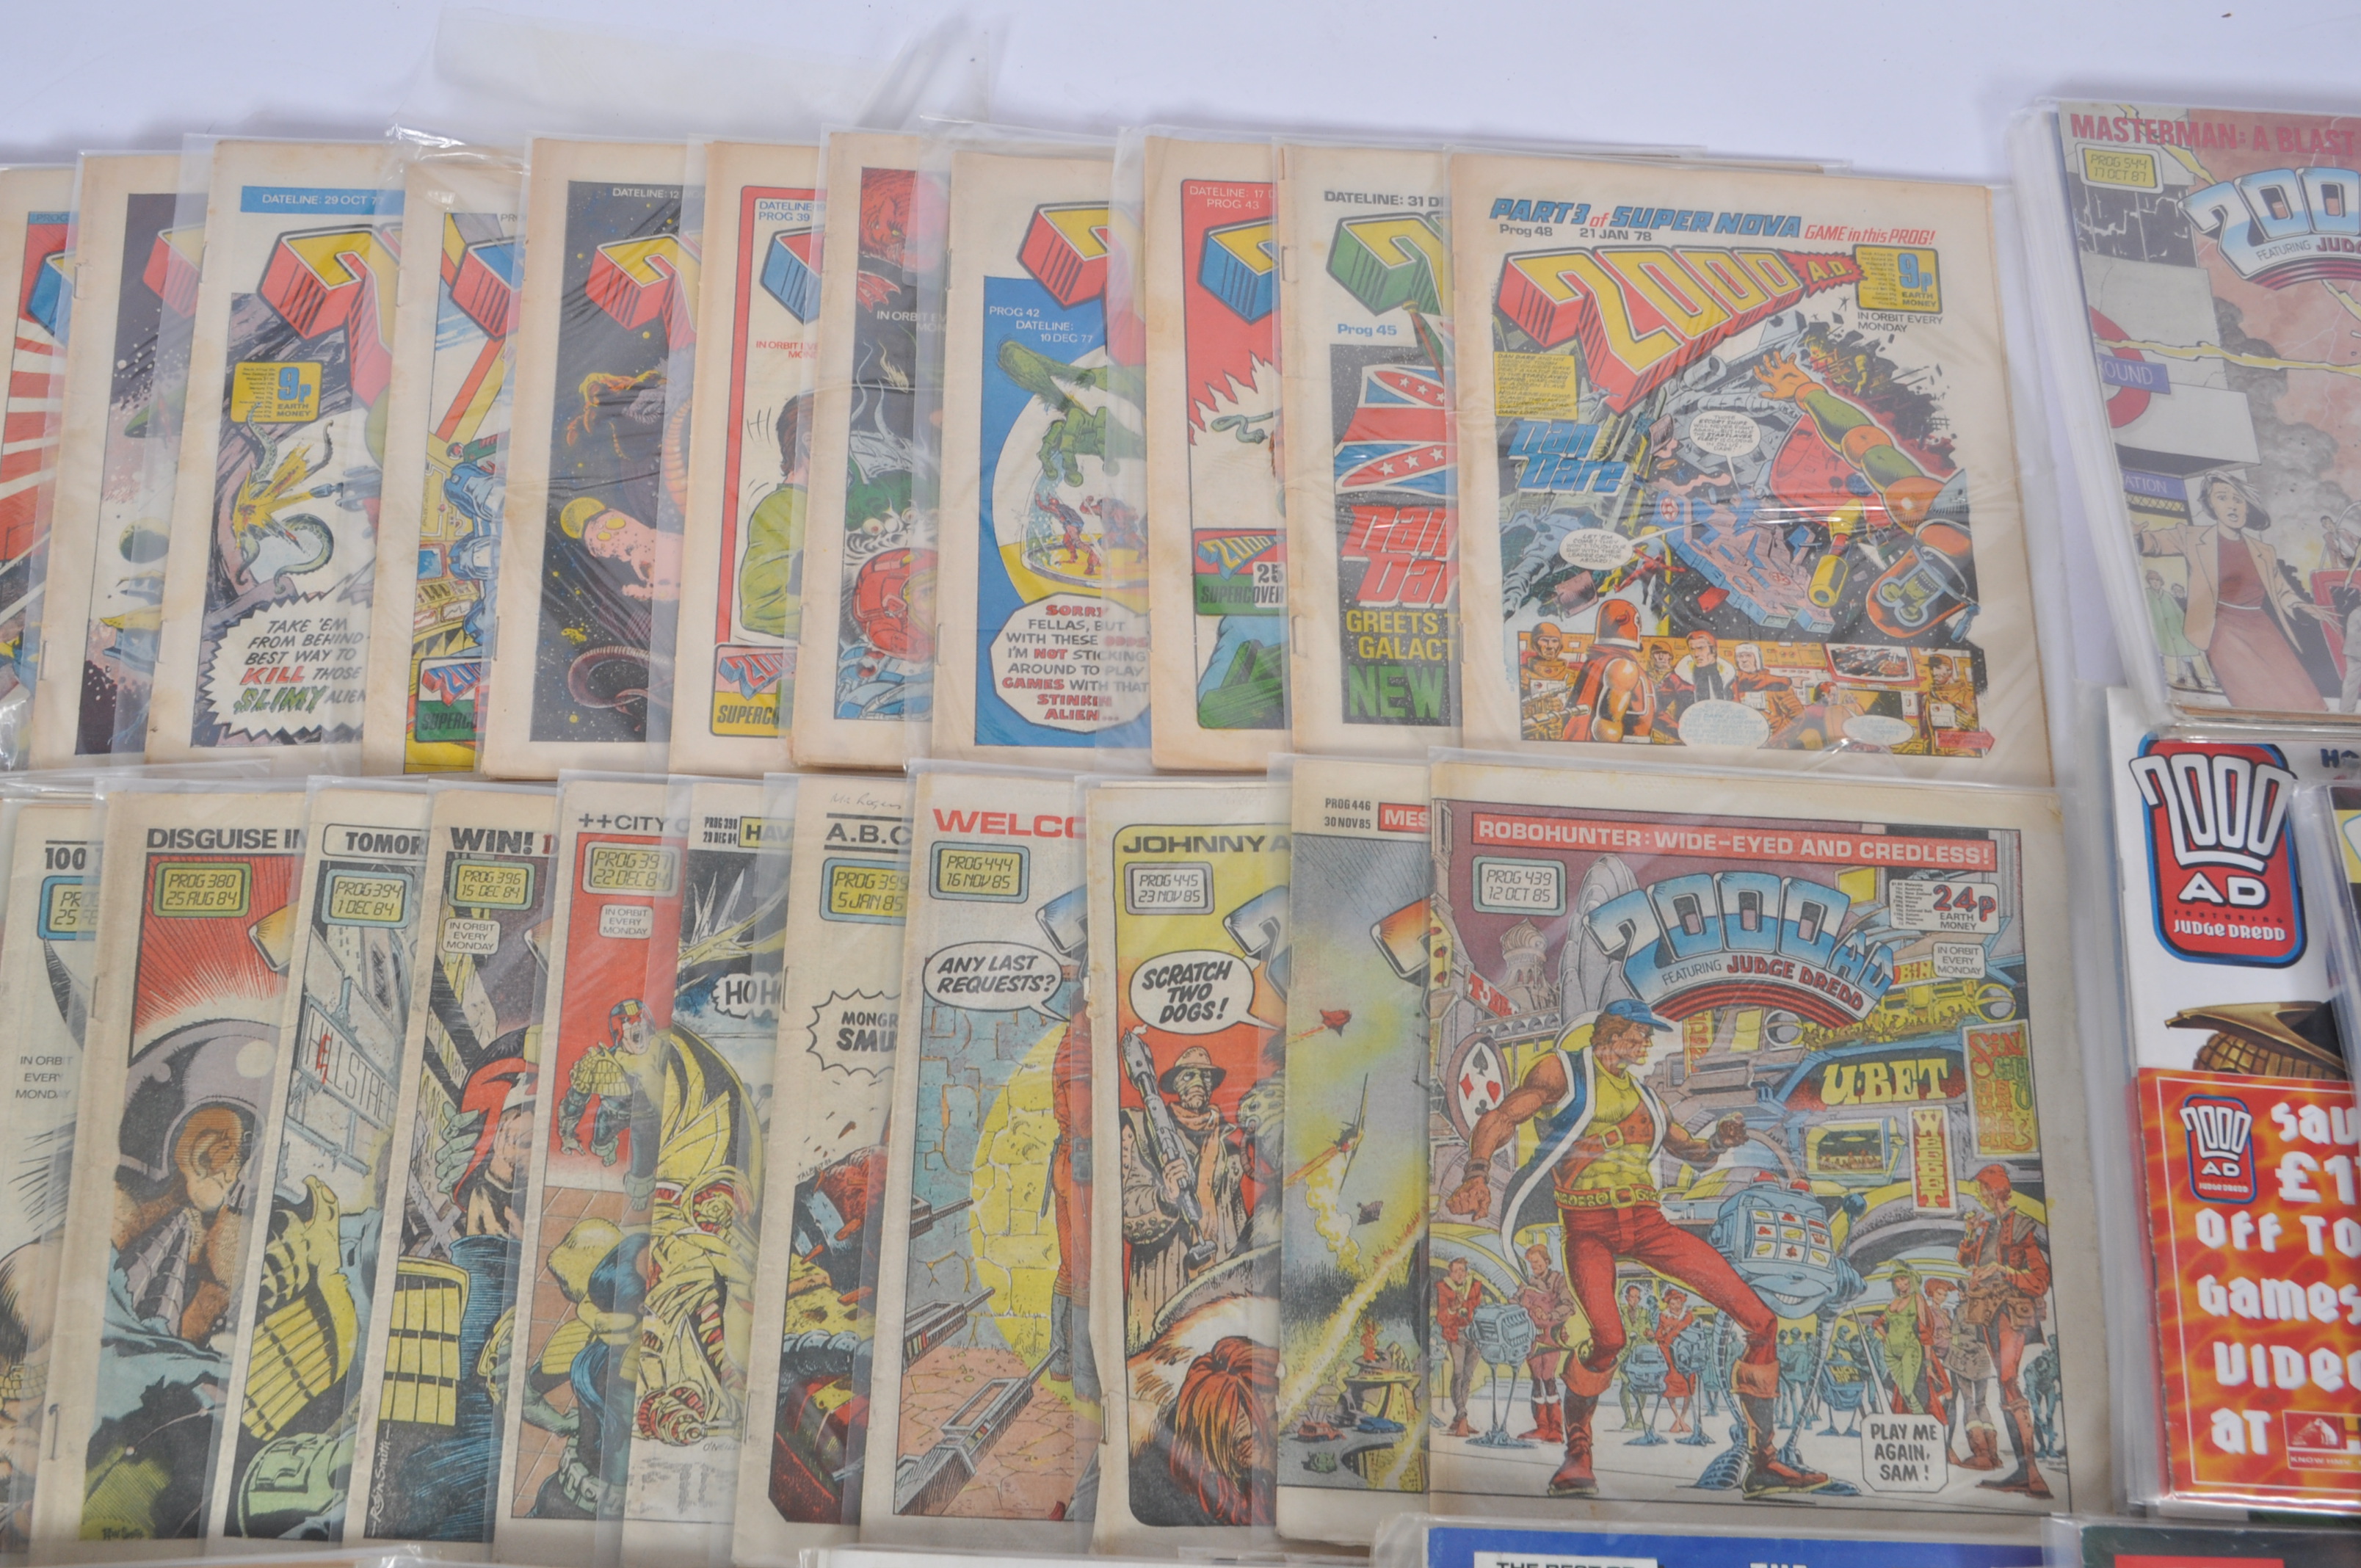 COMIC BOOKS - 2000AD - LARGE COLLECTION OF VINTAGE COMIC BOOKS - Image 12 of 17